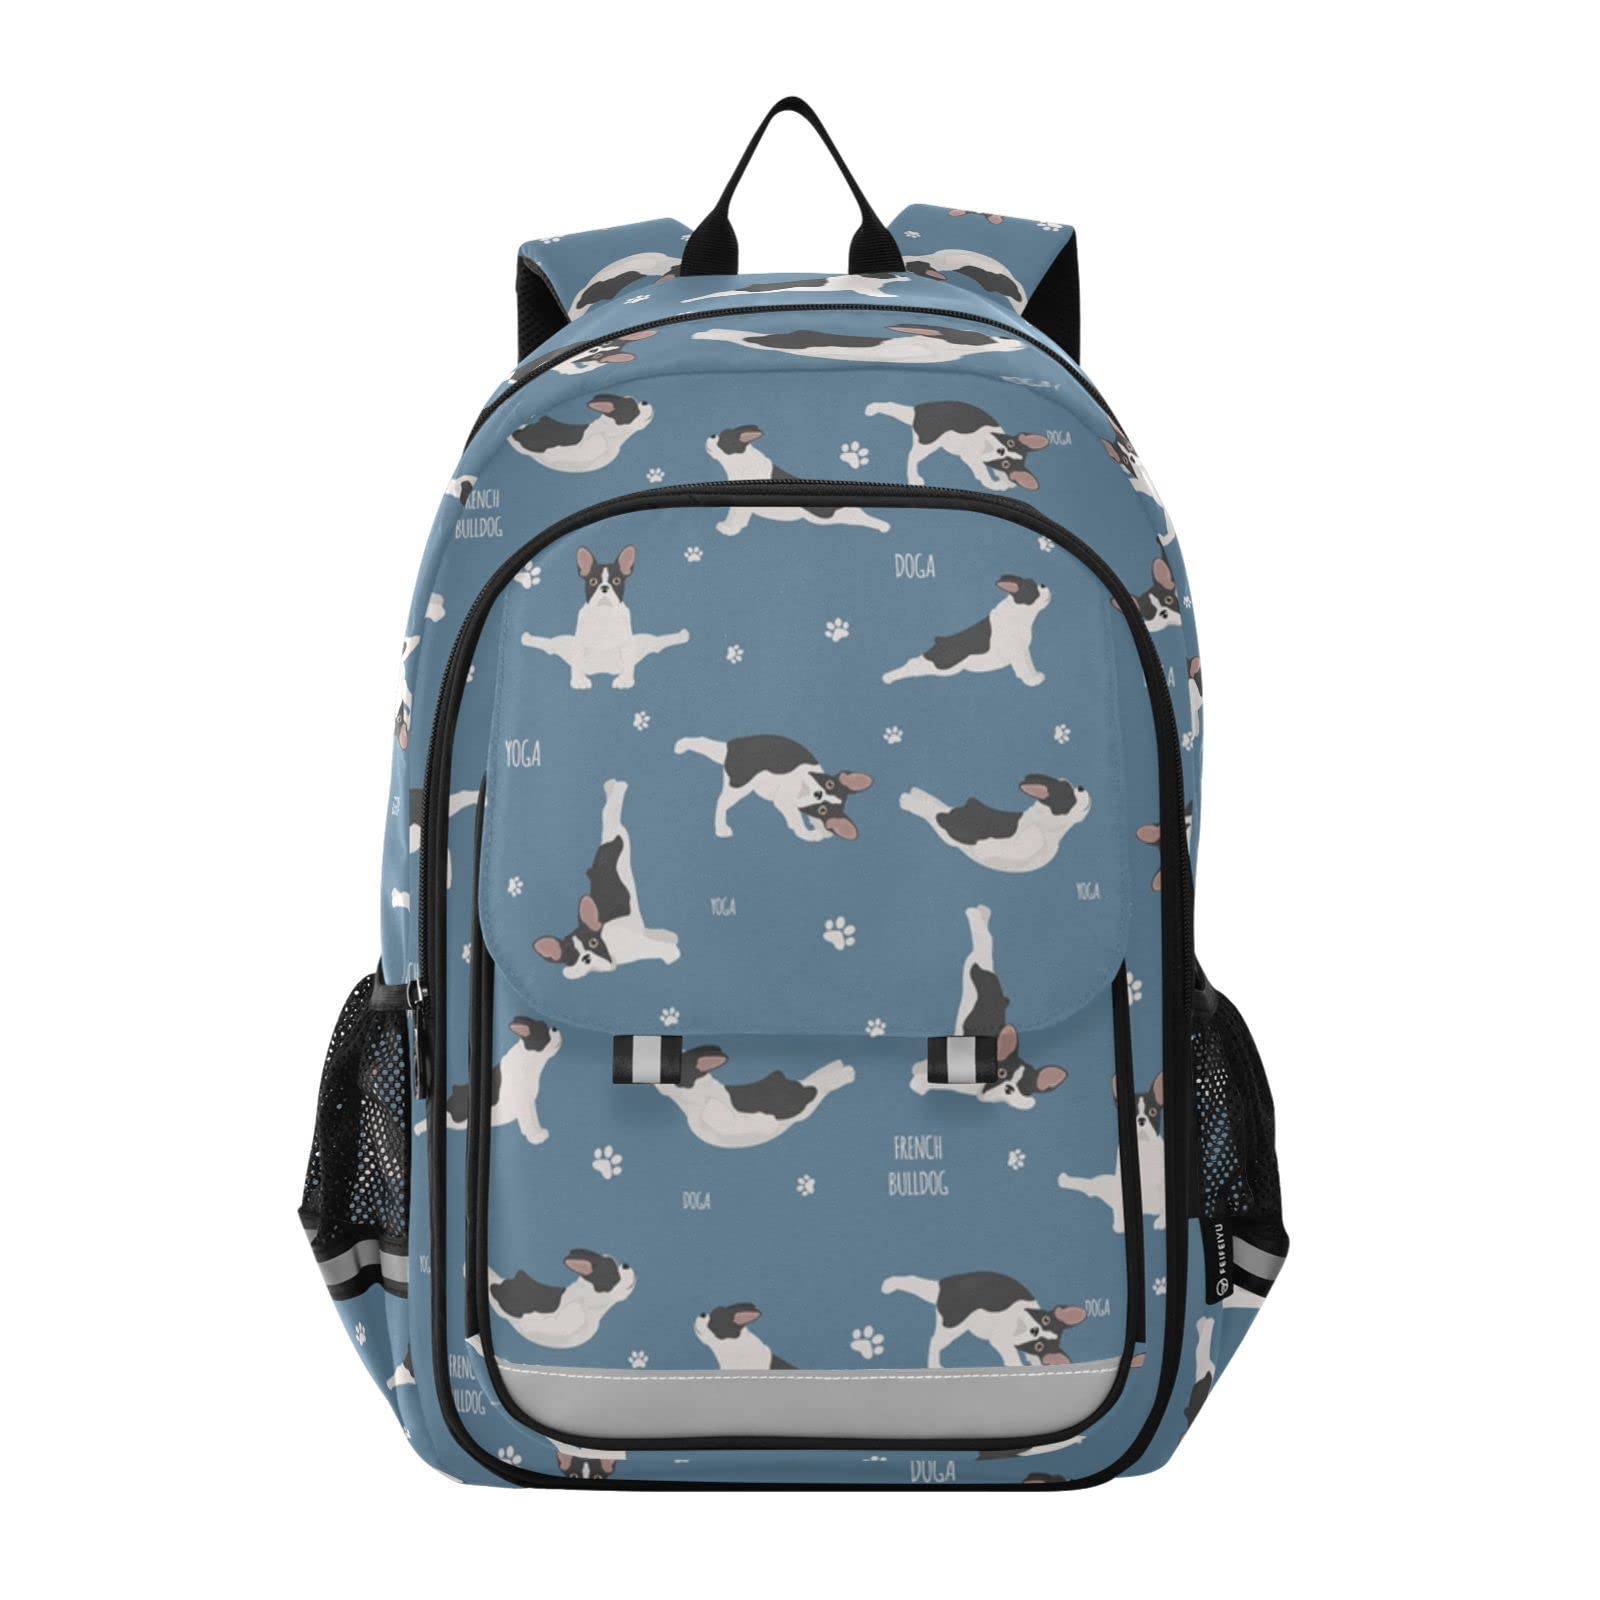 ALAZA Yoga Dog Print French Bulldog Laptop Backpack Purse for Women Men Travel Bag Casual Daypack with Compartment & Multiple Pockets